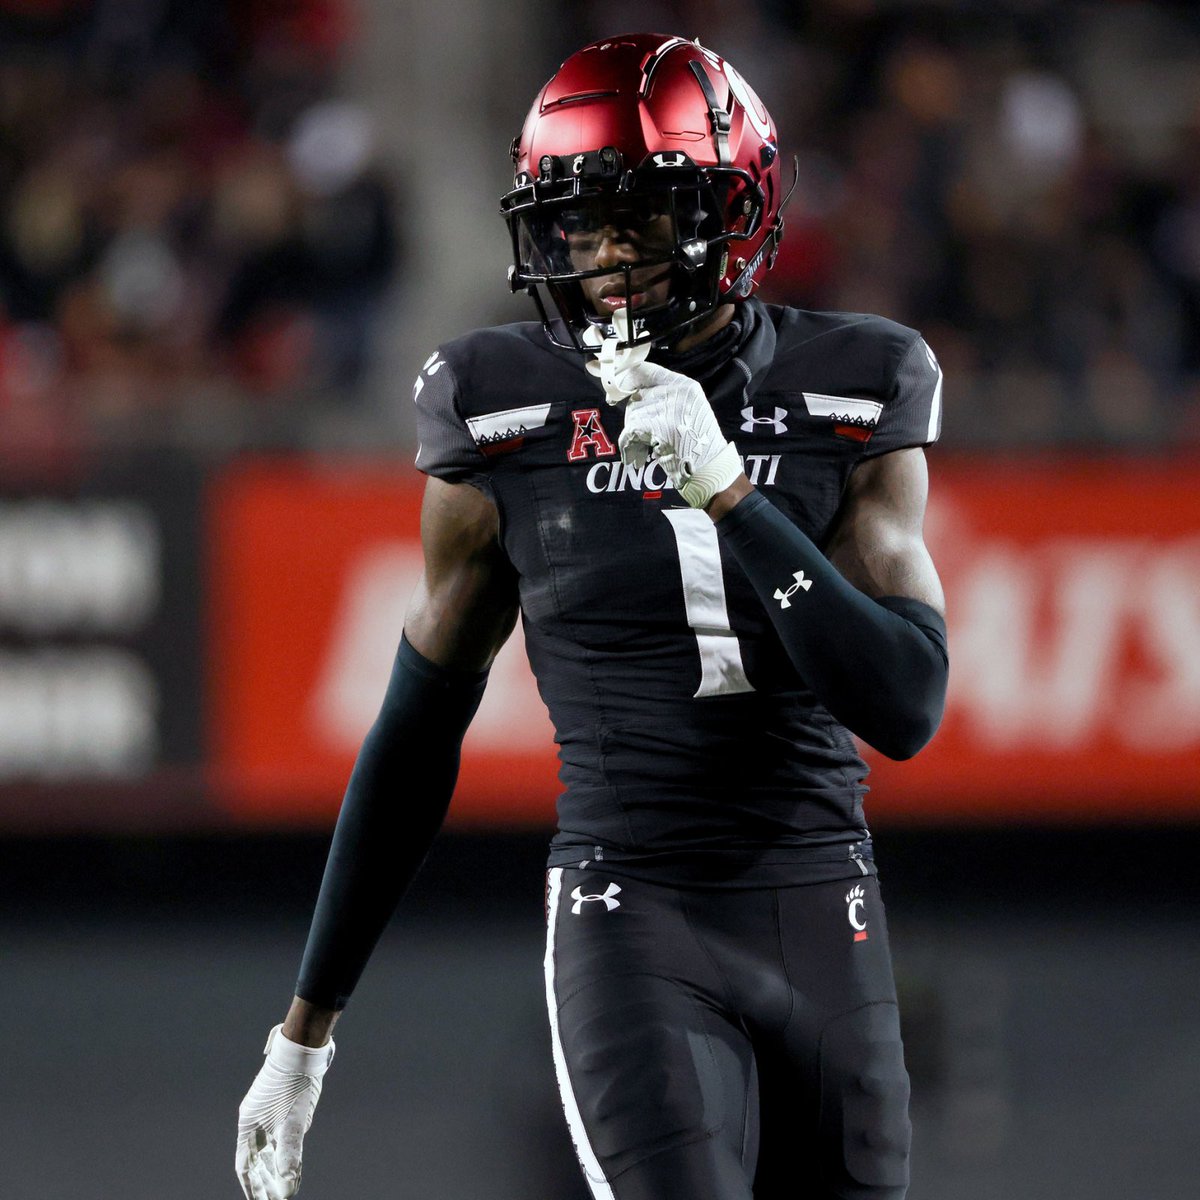 After a great conversation with @TysonVeidt I am blessed to receive my fifth offer from the University of Cincinnati⚫️🔴 @CartersvilleFB @coachemupchat @Coachkingruss @CoachKnight21 @CoachCandela99 @GoBearcatsFB